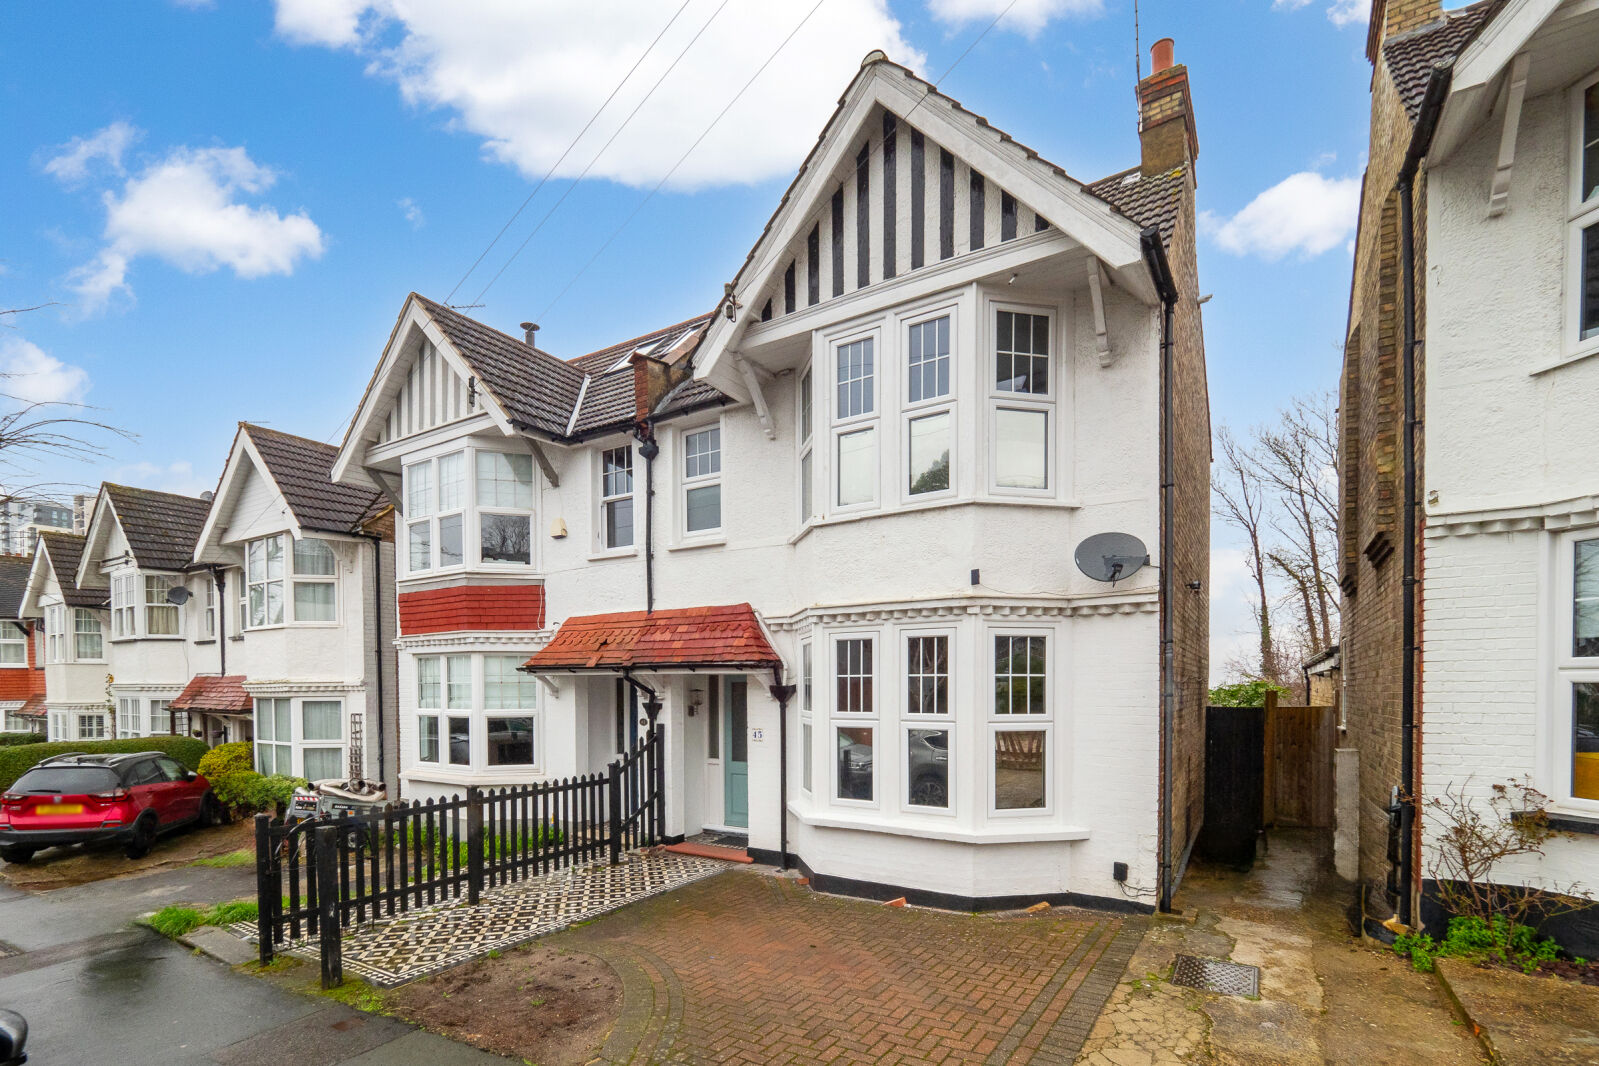 4 bedroom semi detached house for sale Cumnor Road, South Sutton, SM2, main image